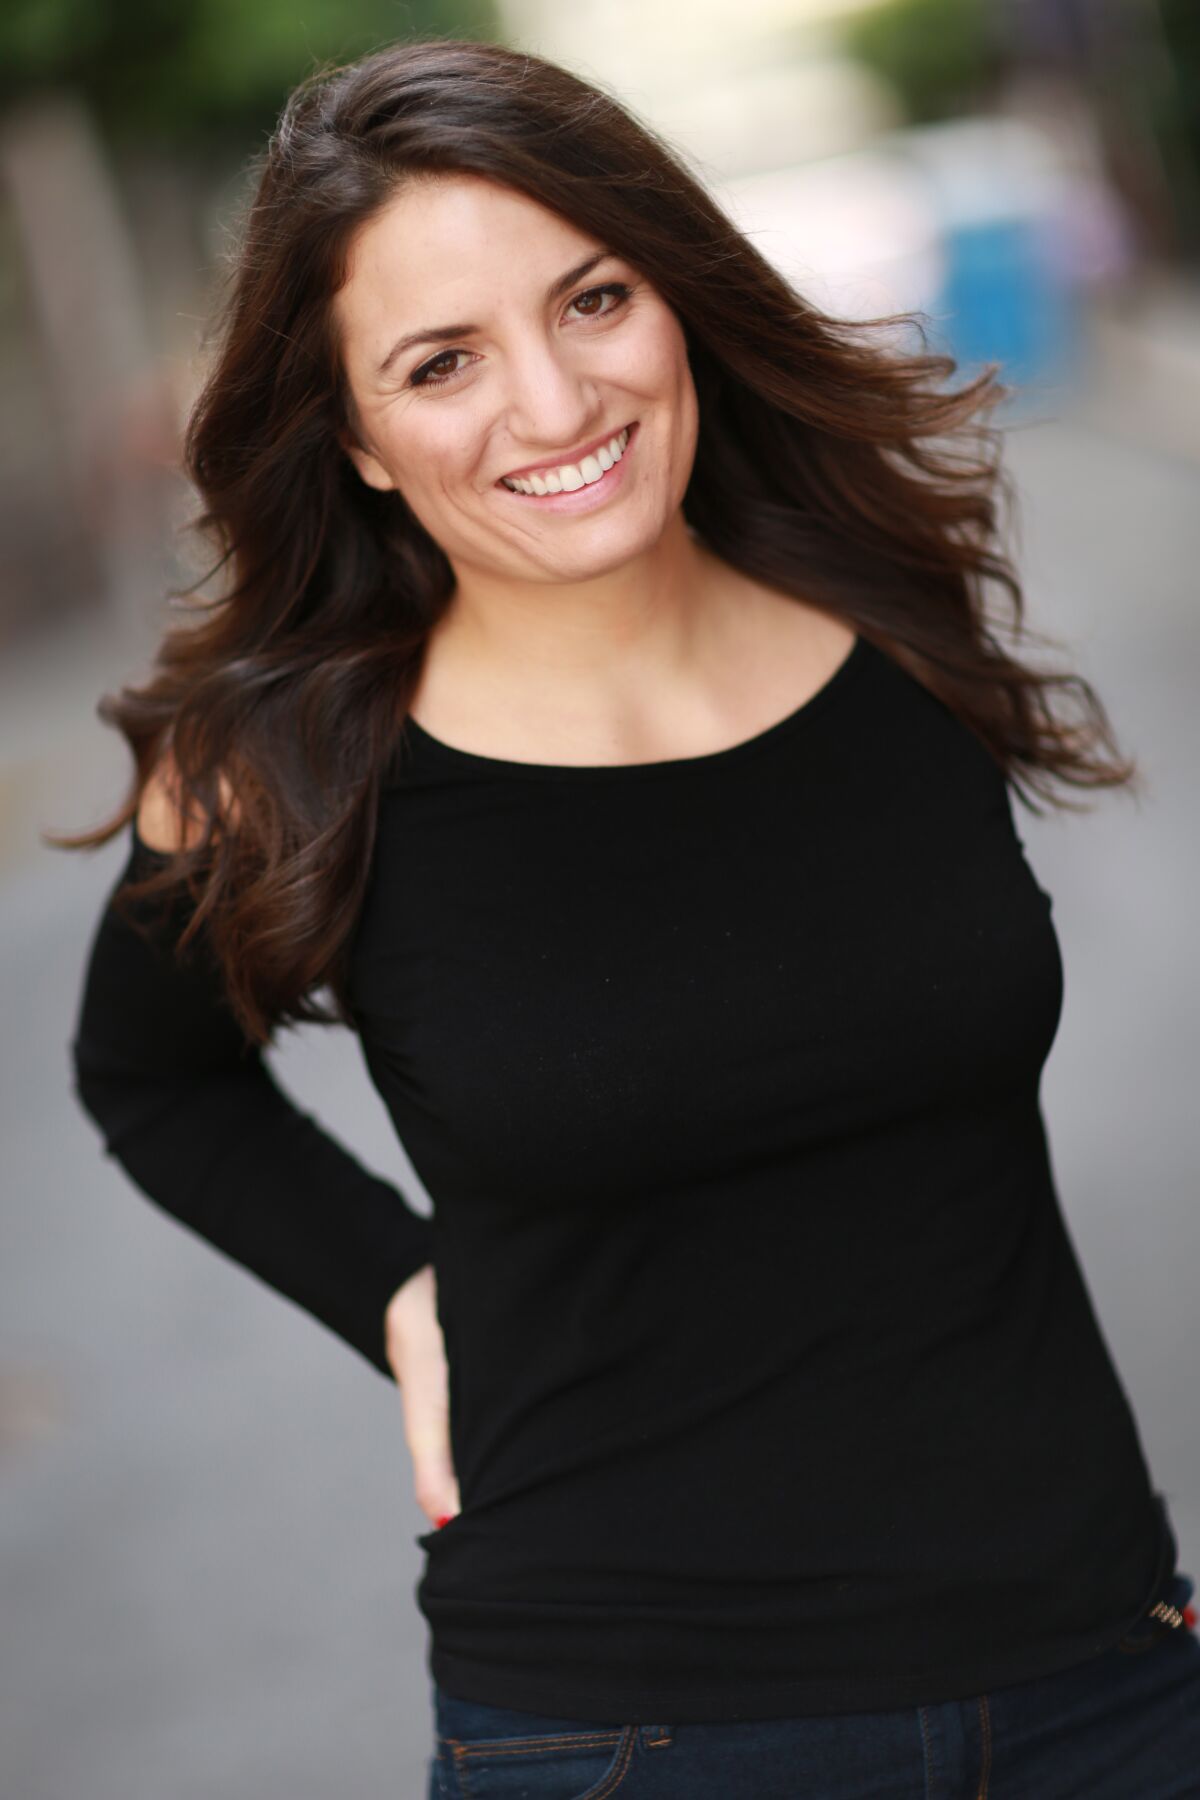 Dominique Salerno is a graduate of La Jolla Playhouse’s youth conservatory program.